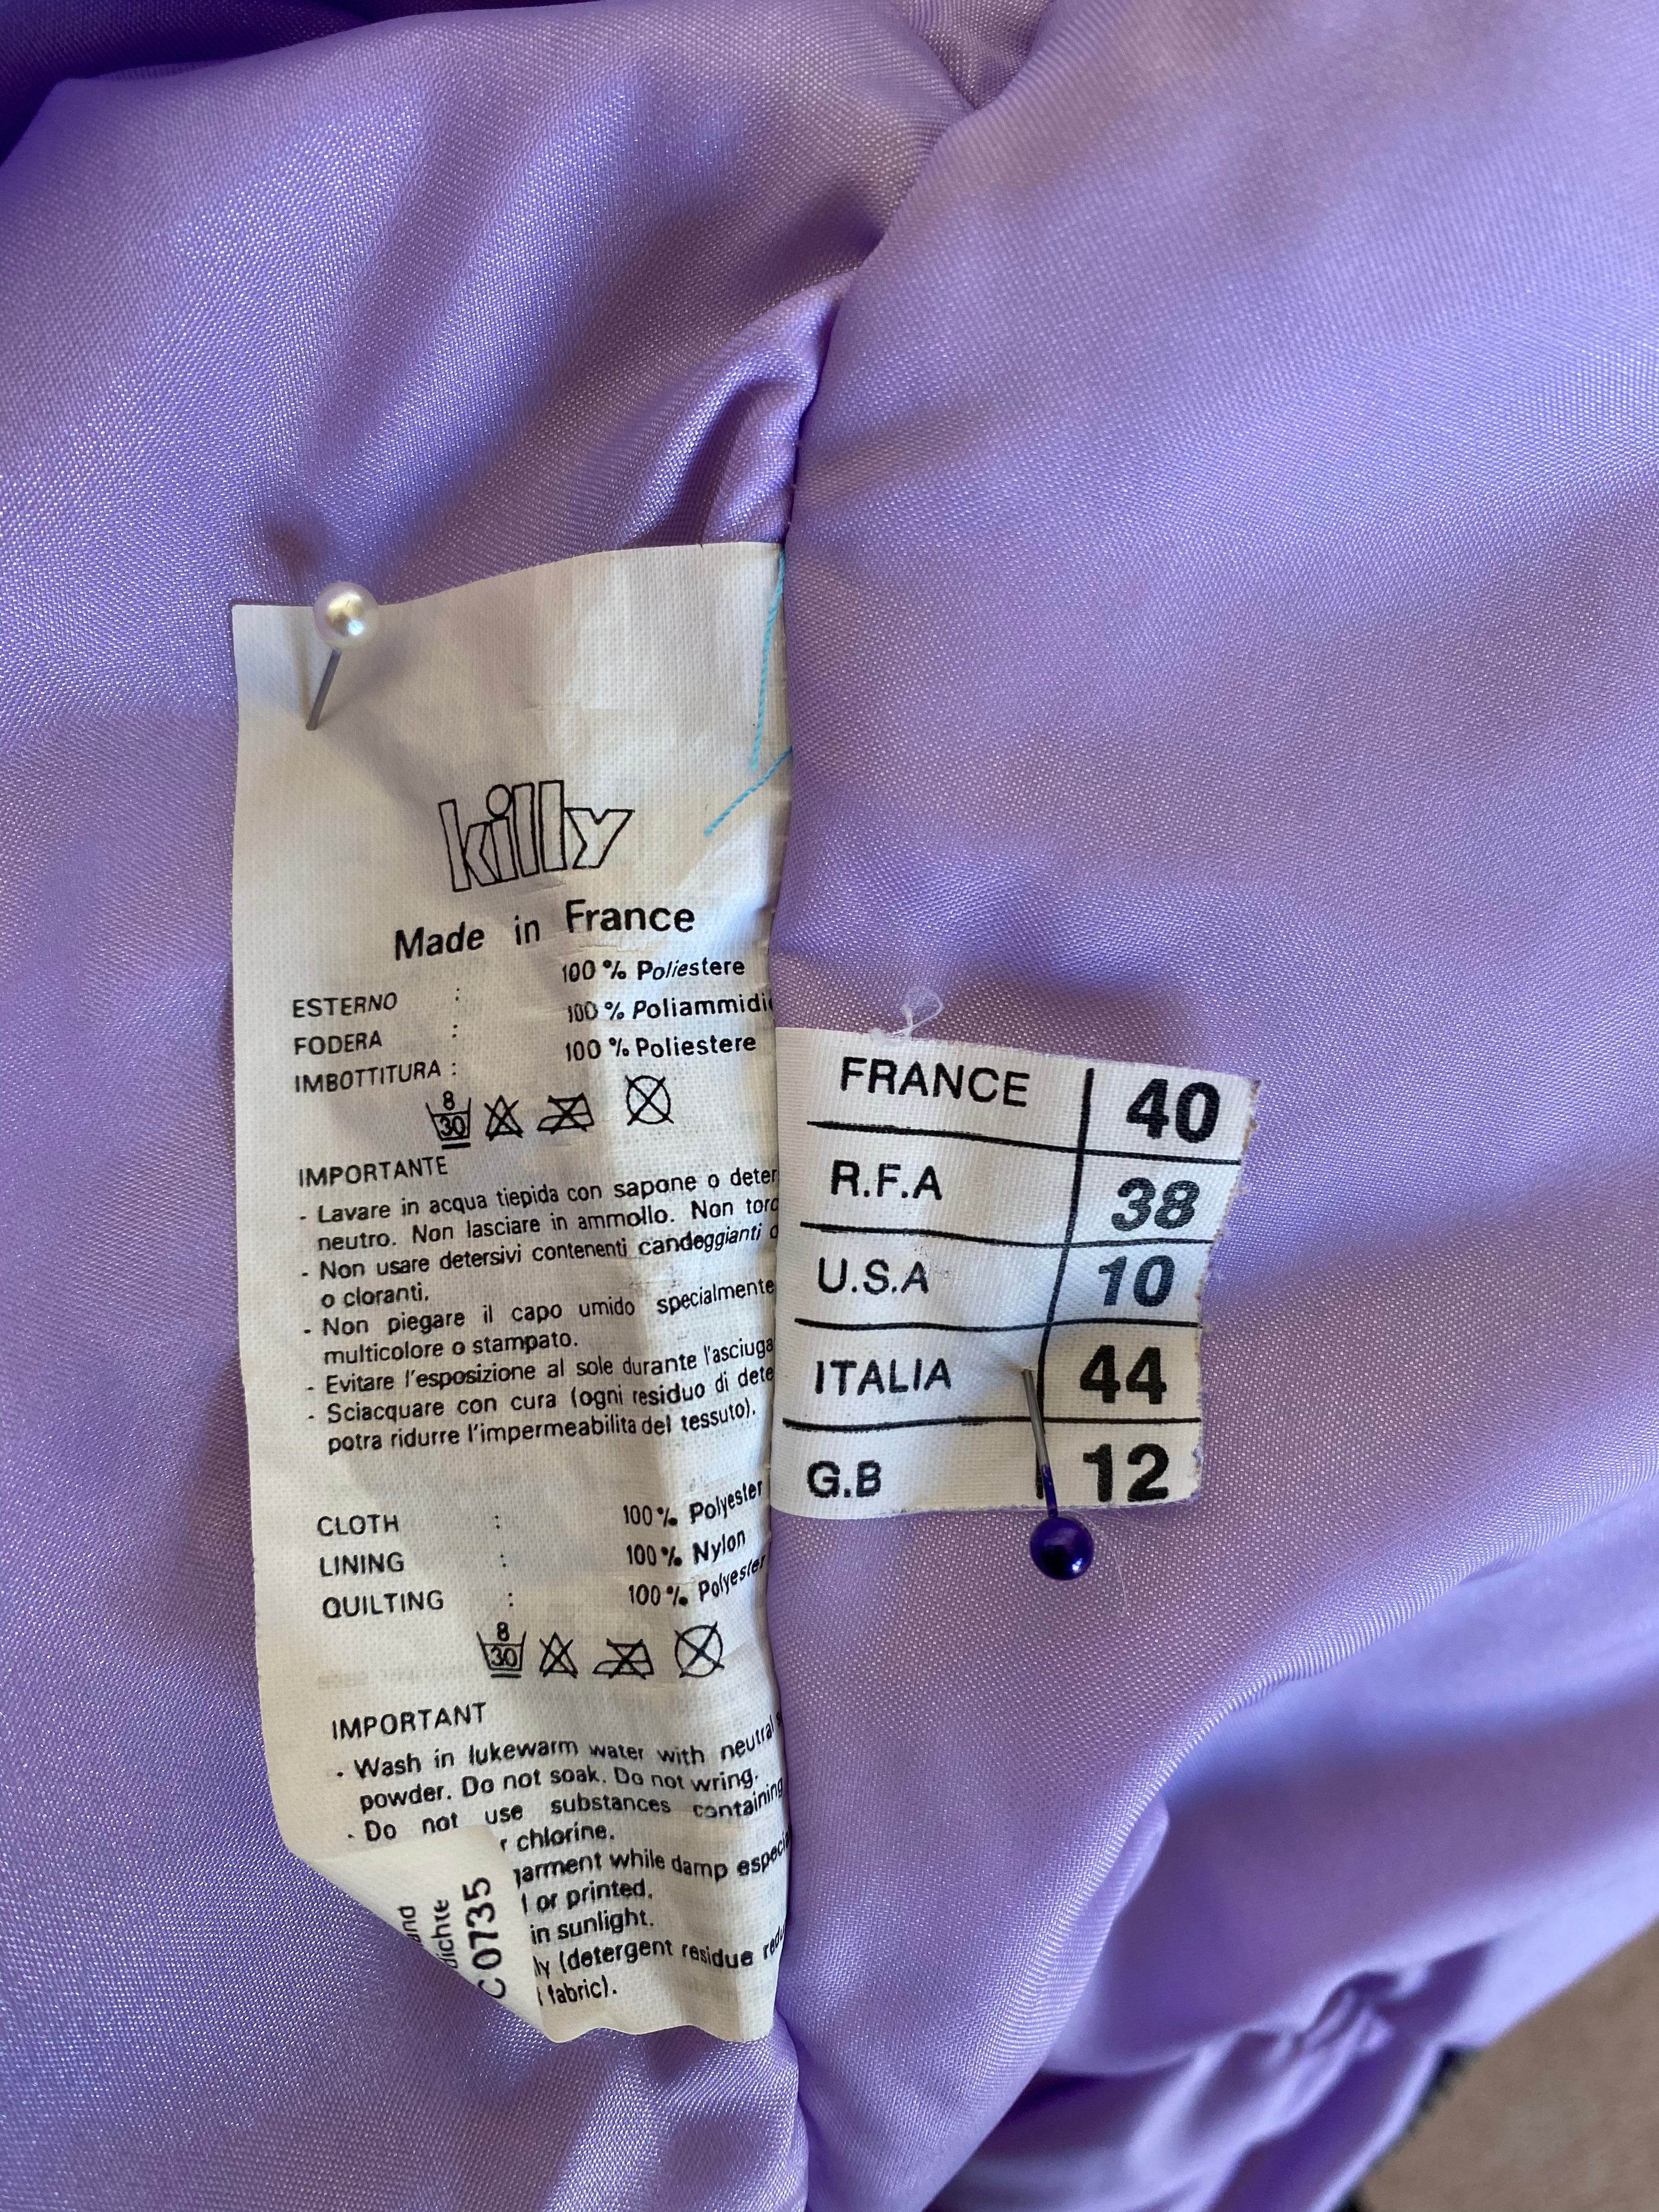 Killy purple one piece ski suit with belt and hood that folds away into the collar. Label